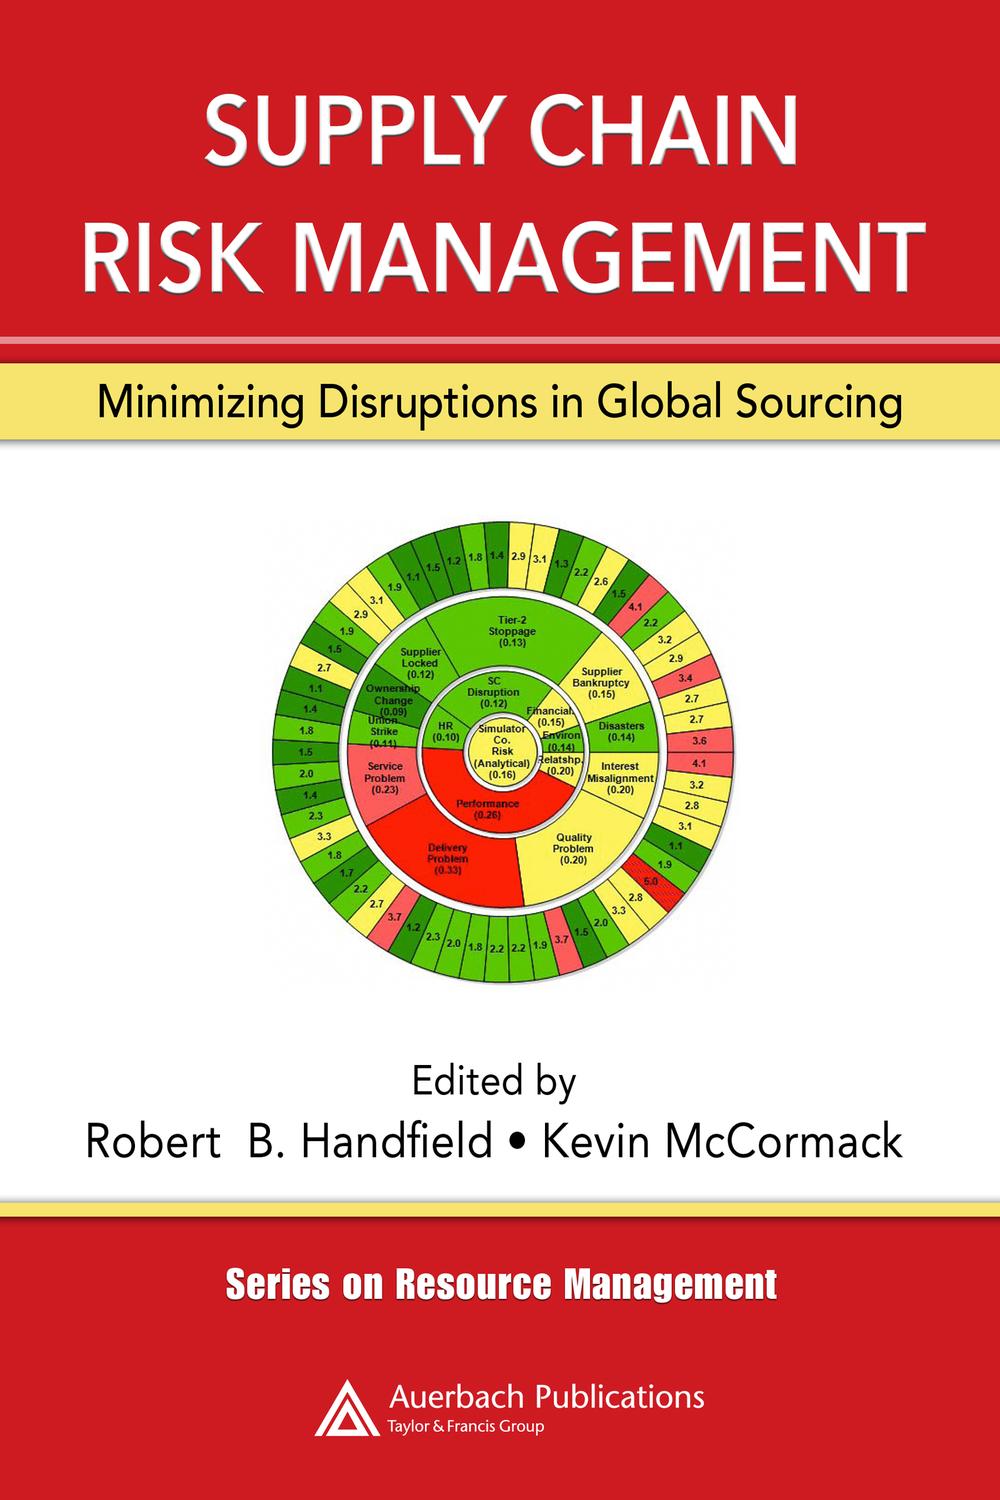 Supply Chain Risk Management - Robert Handfield, Kevin P. McCormack